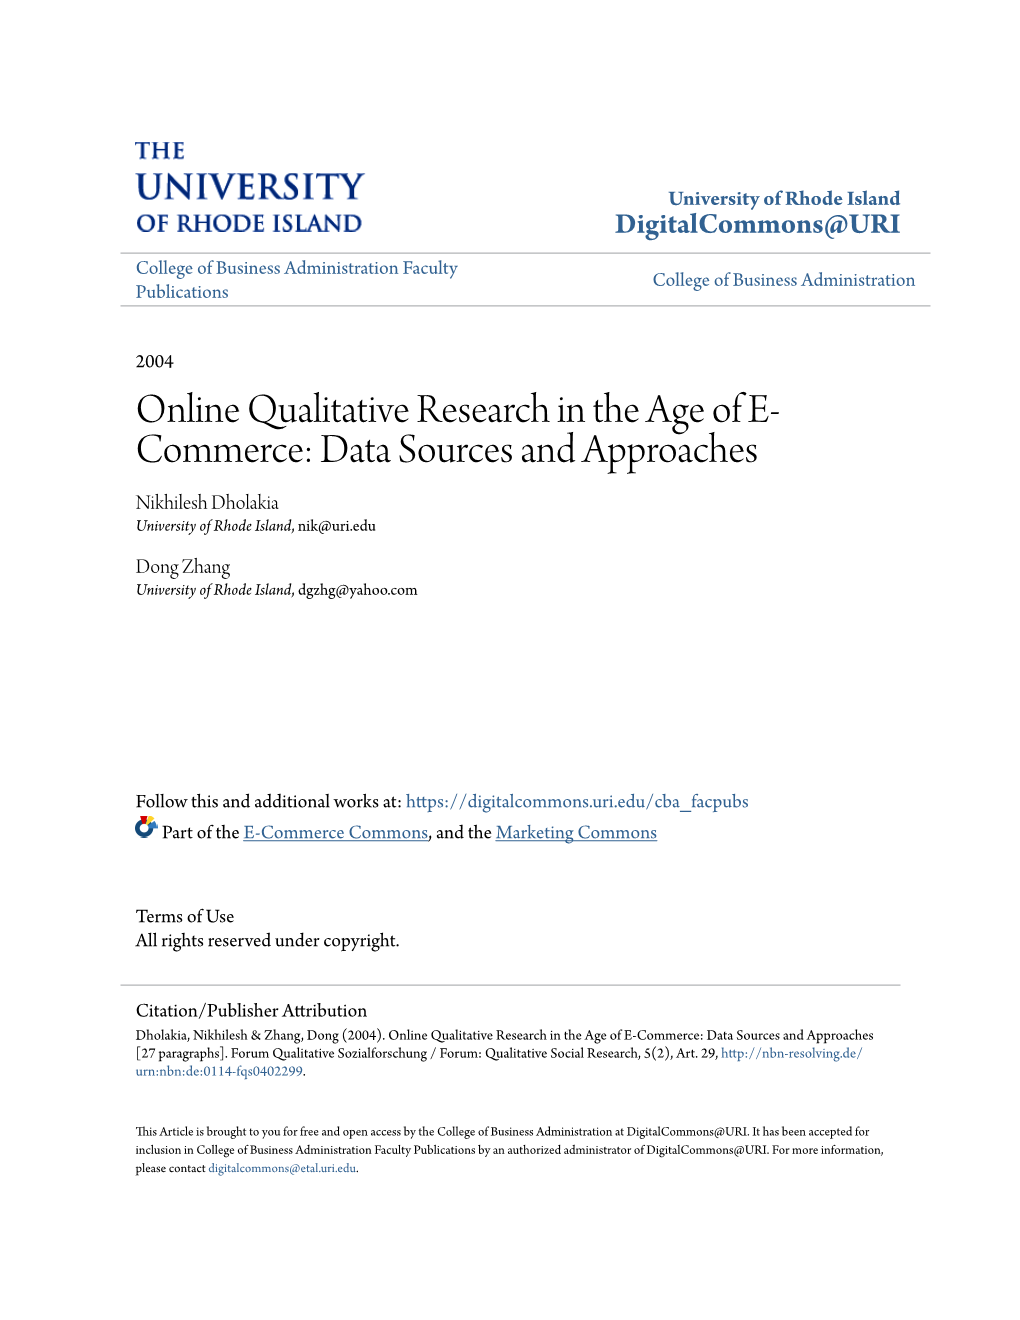 Online Qualitative Research in the Age of E-Commerce: Data Sources and Approaches [27 Paragraphs]